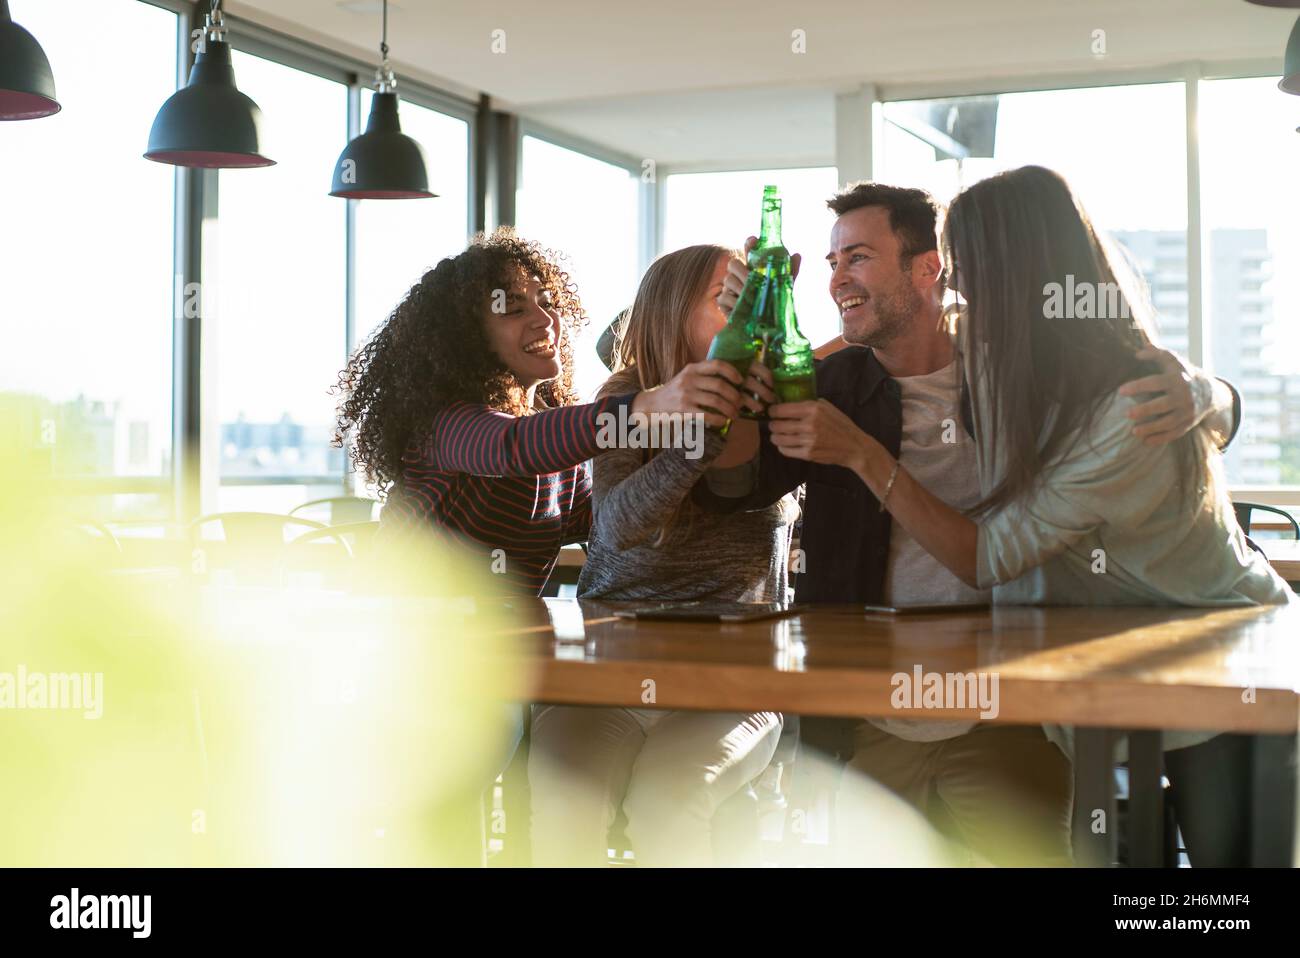 Smiling colleagues toasting drink bottles in office Stock Photo